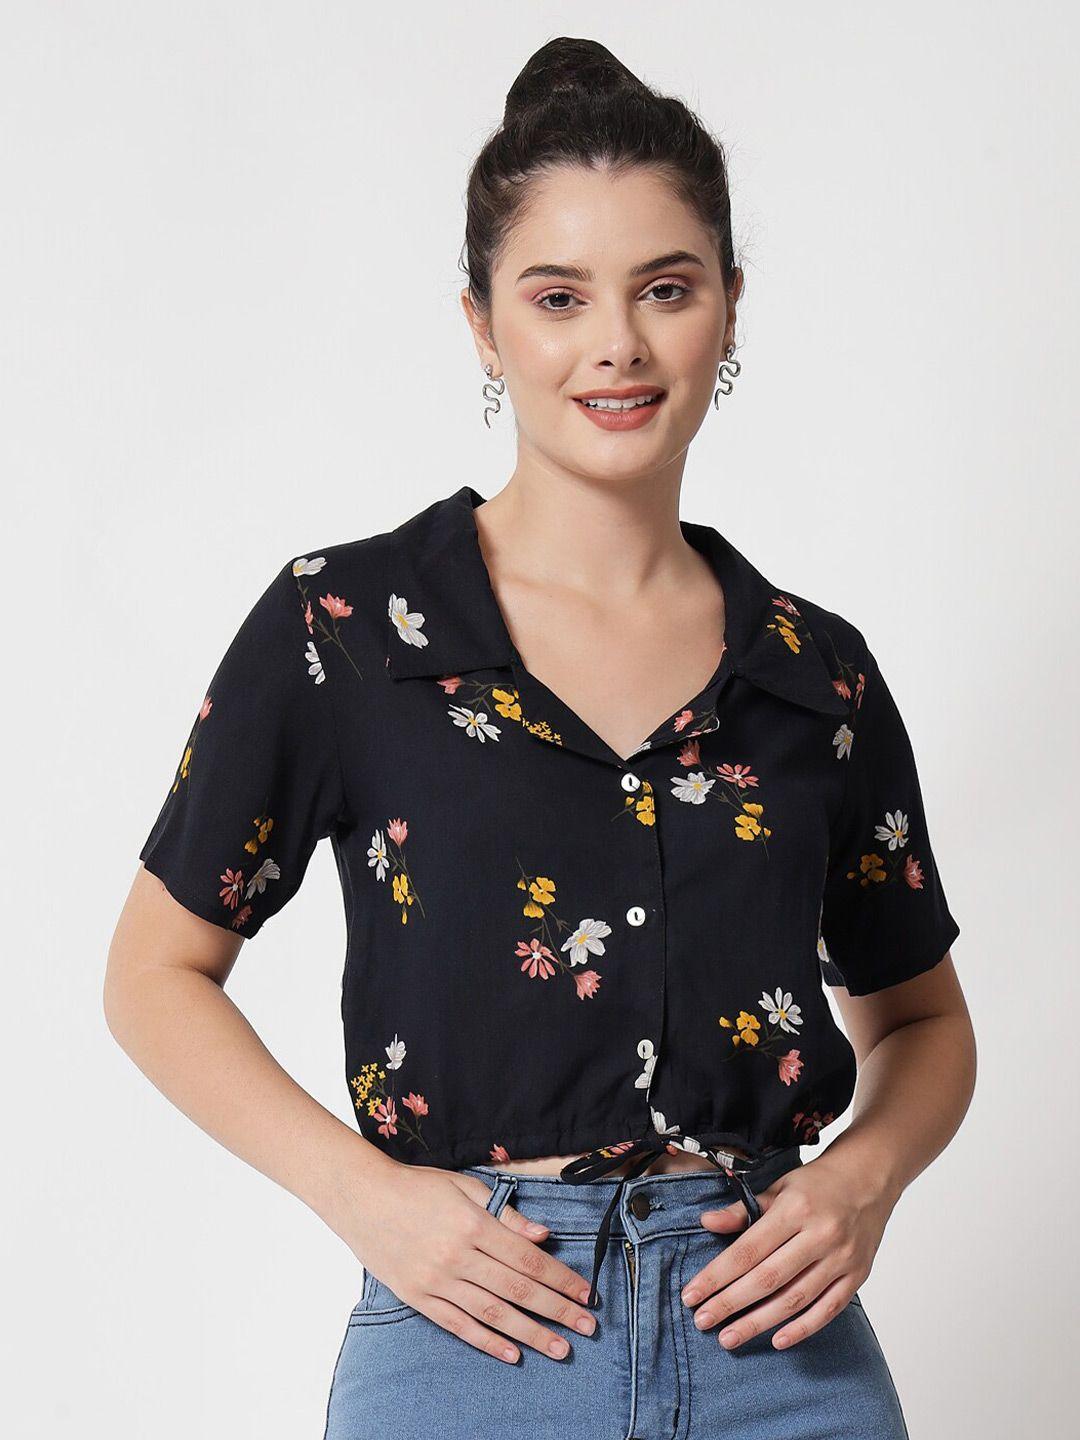 the dry state black floral print shirt style waist tie up top